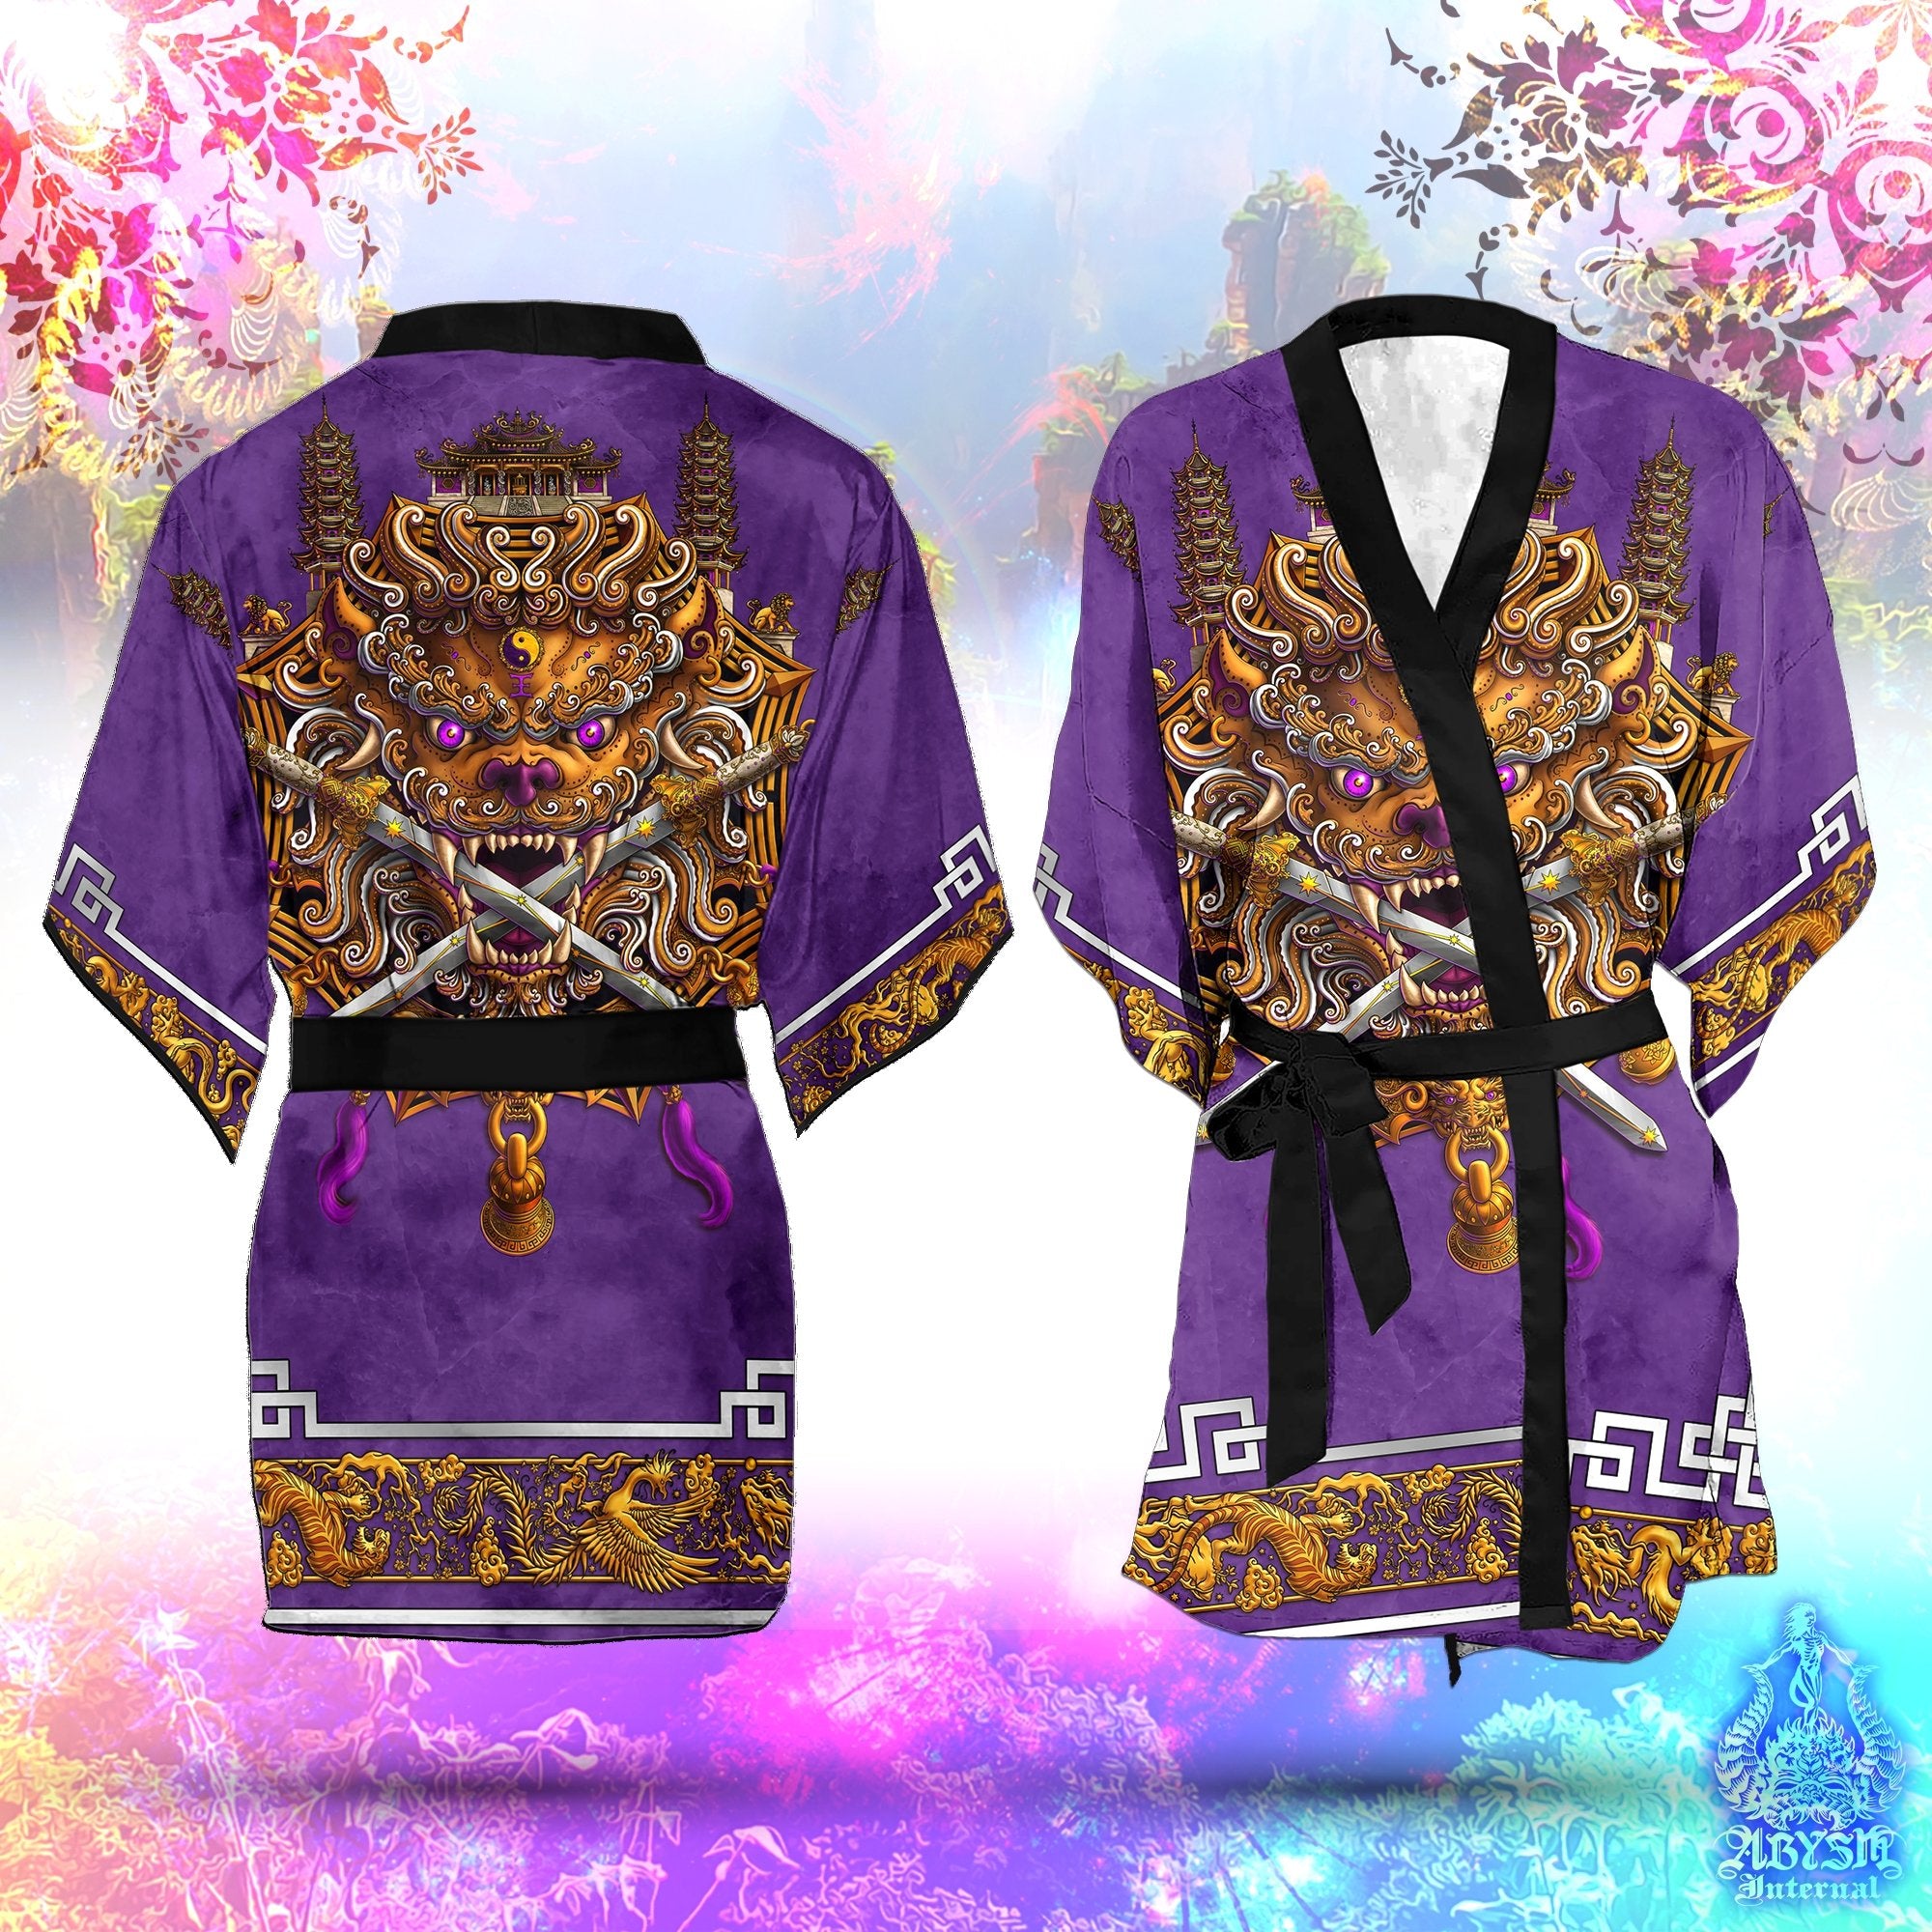 Sword Lion Cover Up, Beach Outfit, Chinese Party Kimono, Taiwan Summer Festival Robe, Asian Indie and Alternative Clothing, Unisex - Purple White - Abysm Internal